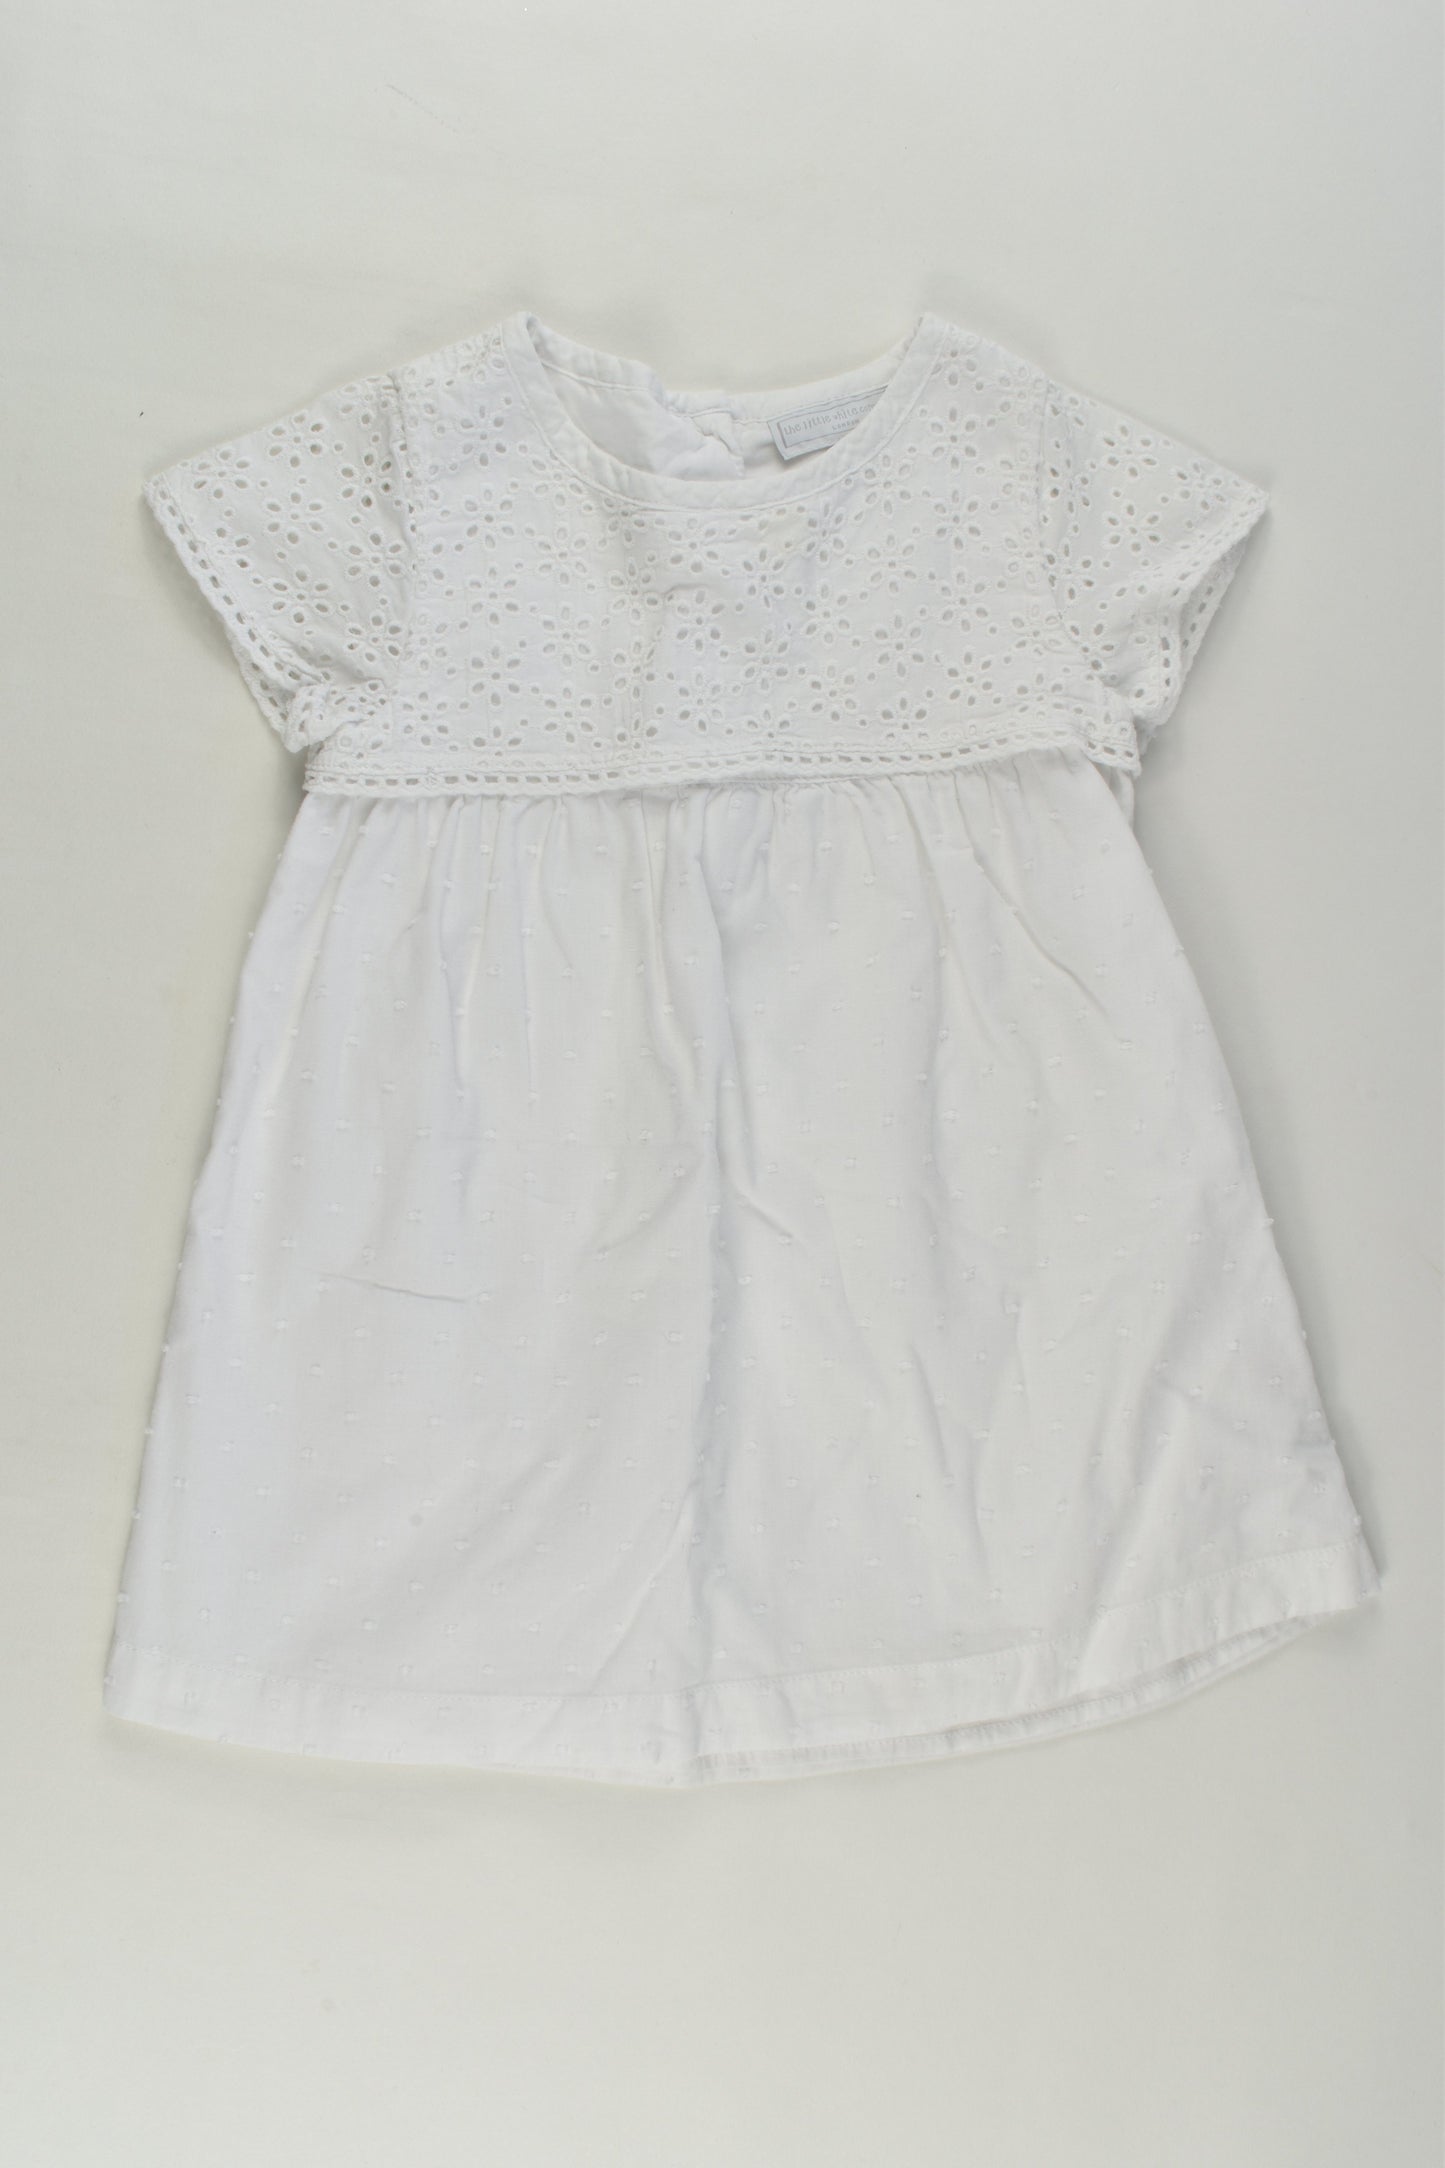 The Little White Company London Size 0 (9-12 months) Lined Lace Dress